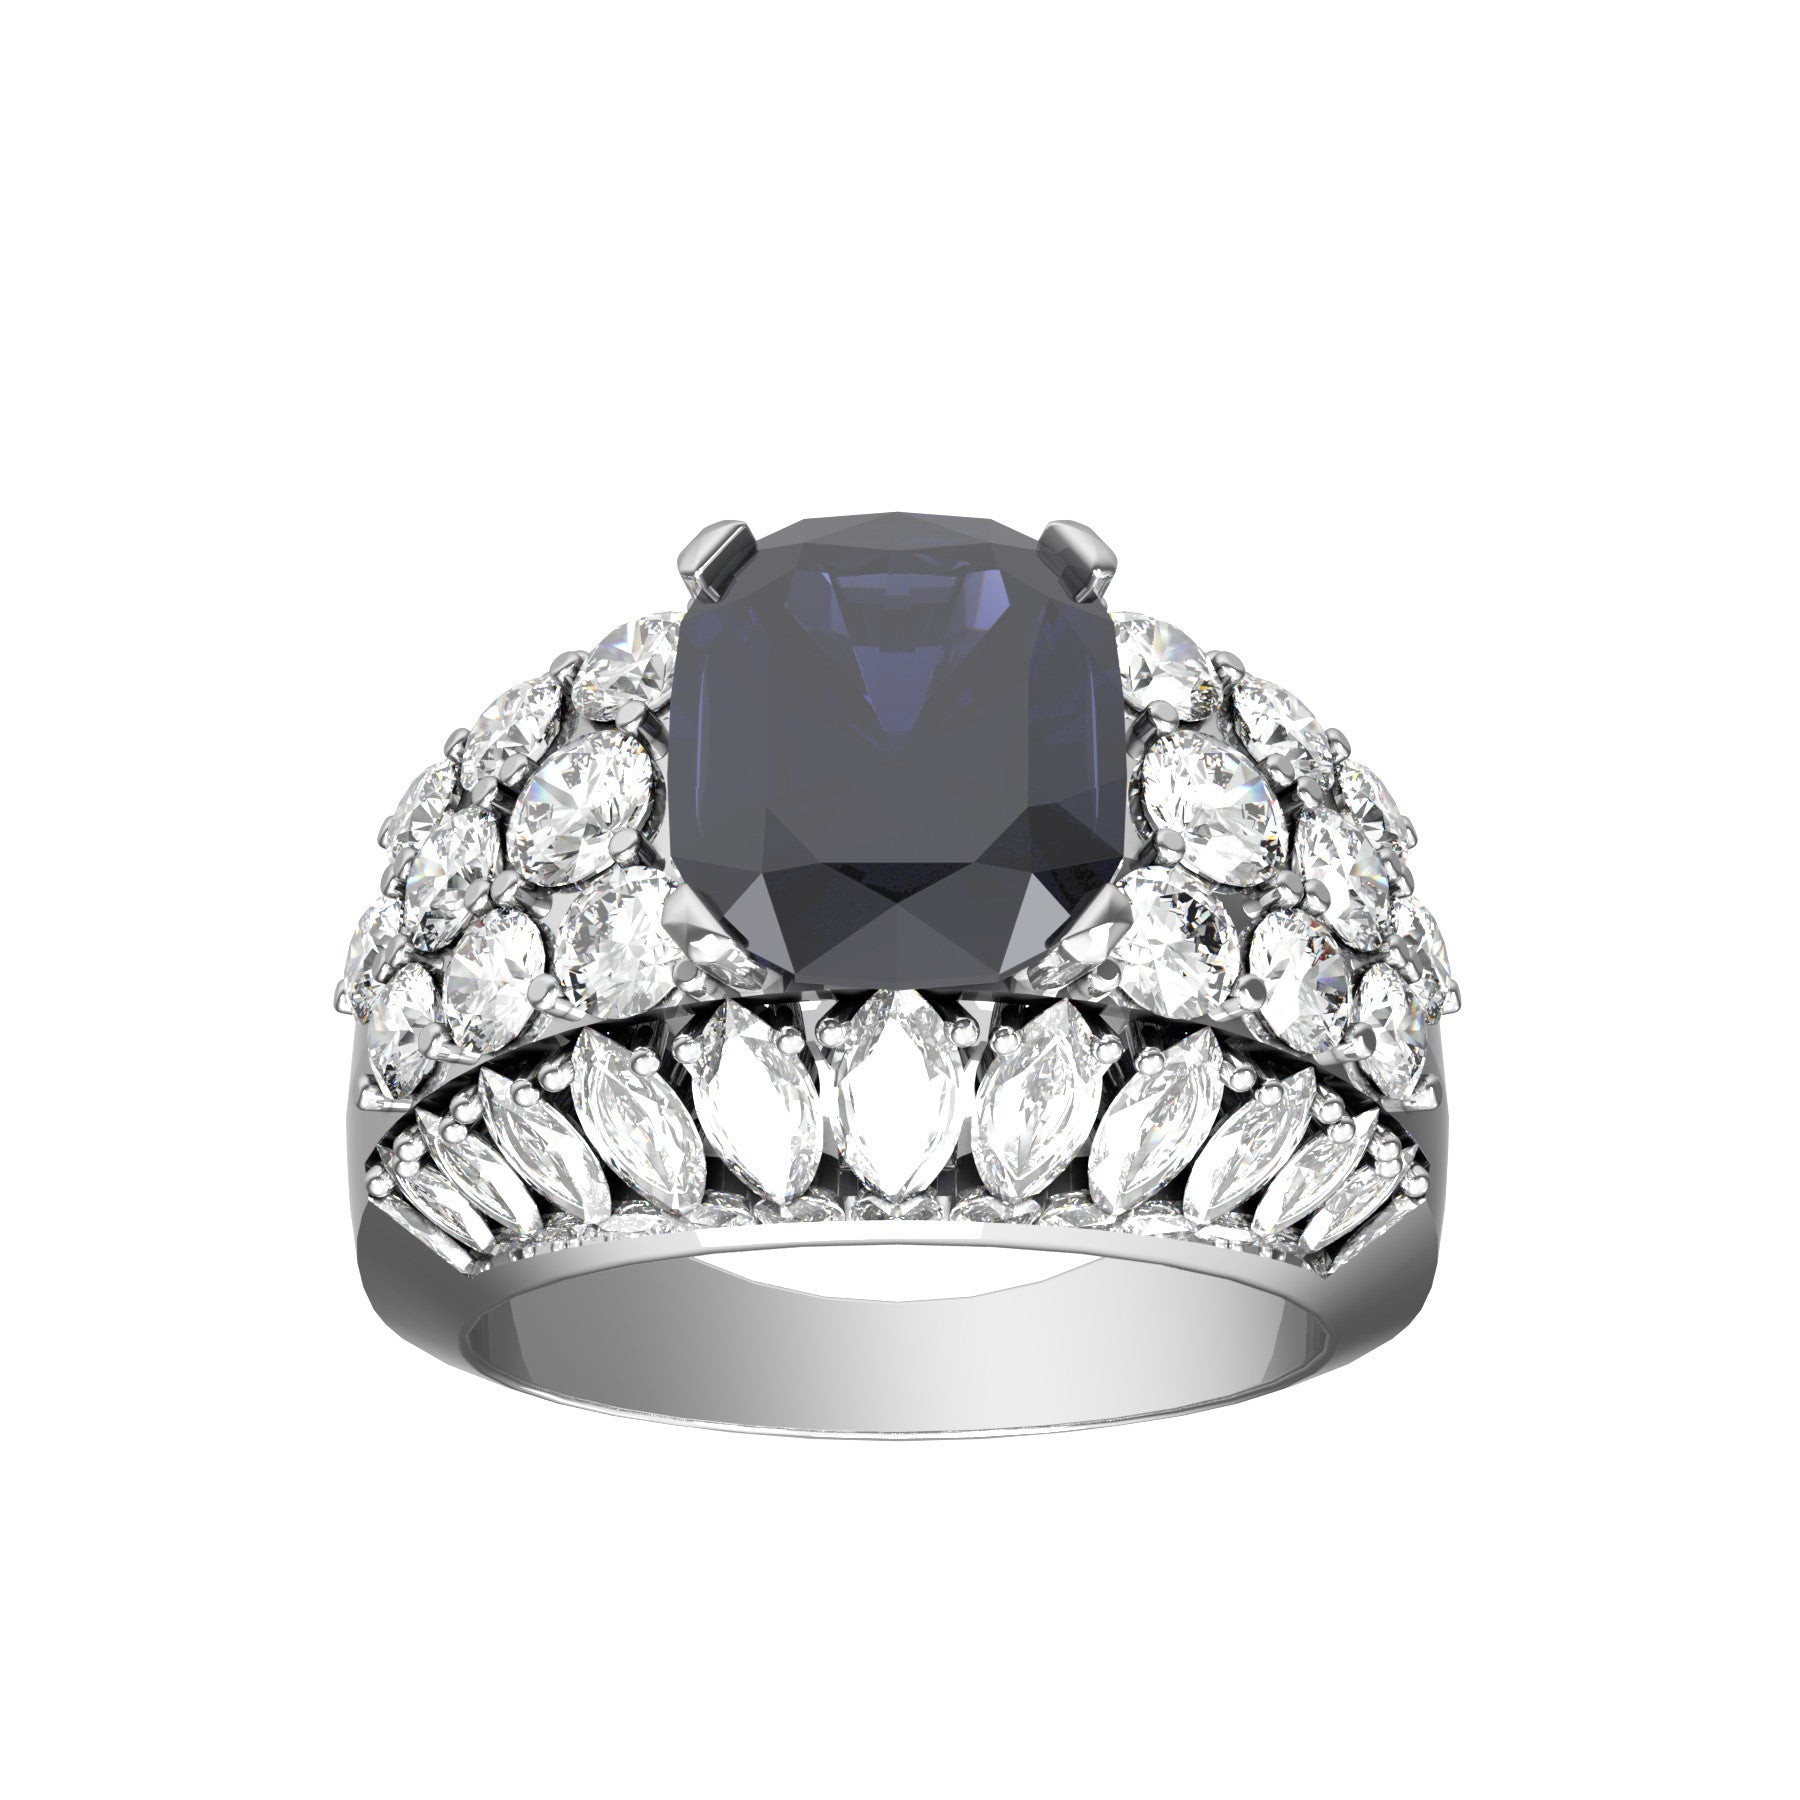 band ring, 3,48 ct natural sapphire, natural round diamonds, natural marquise diamonds,18 K white gold, weight about 12,0 g. (0,42 oz), width 13,5 mm max